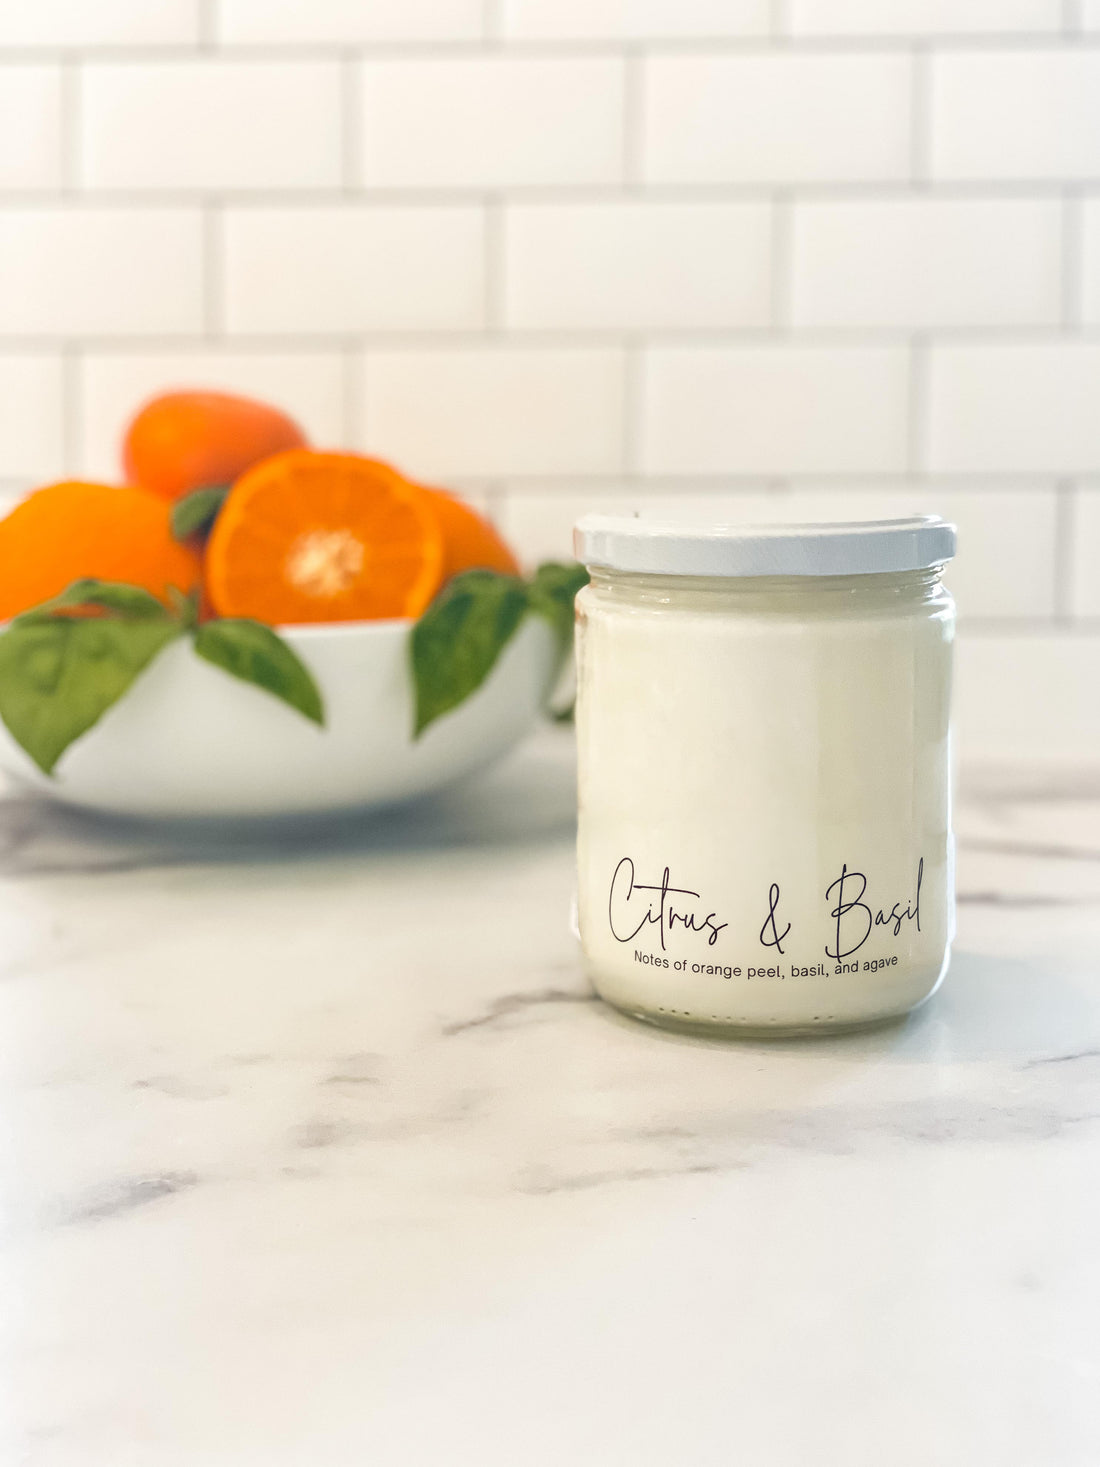  Citrus and Basil - Hcubed Candles